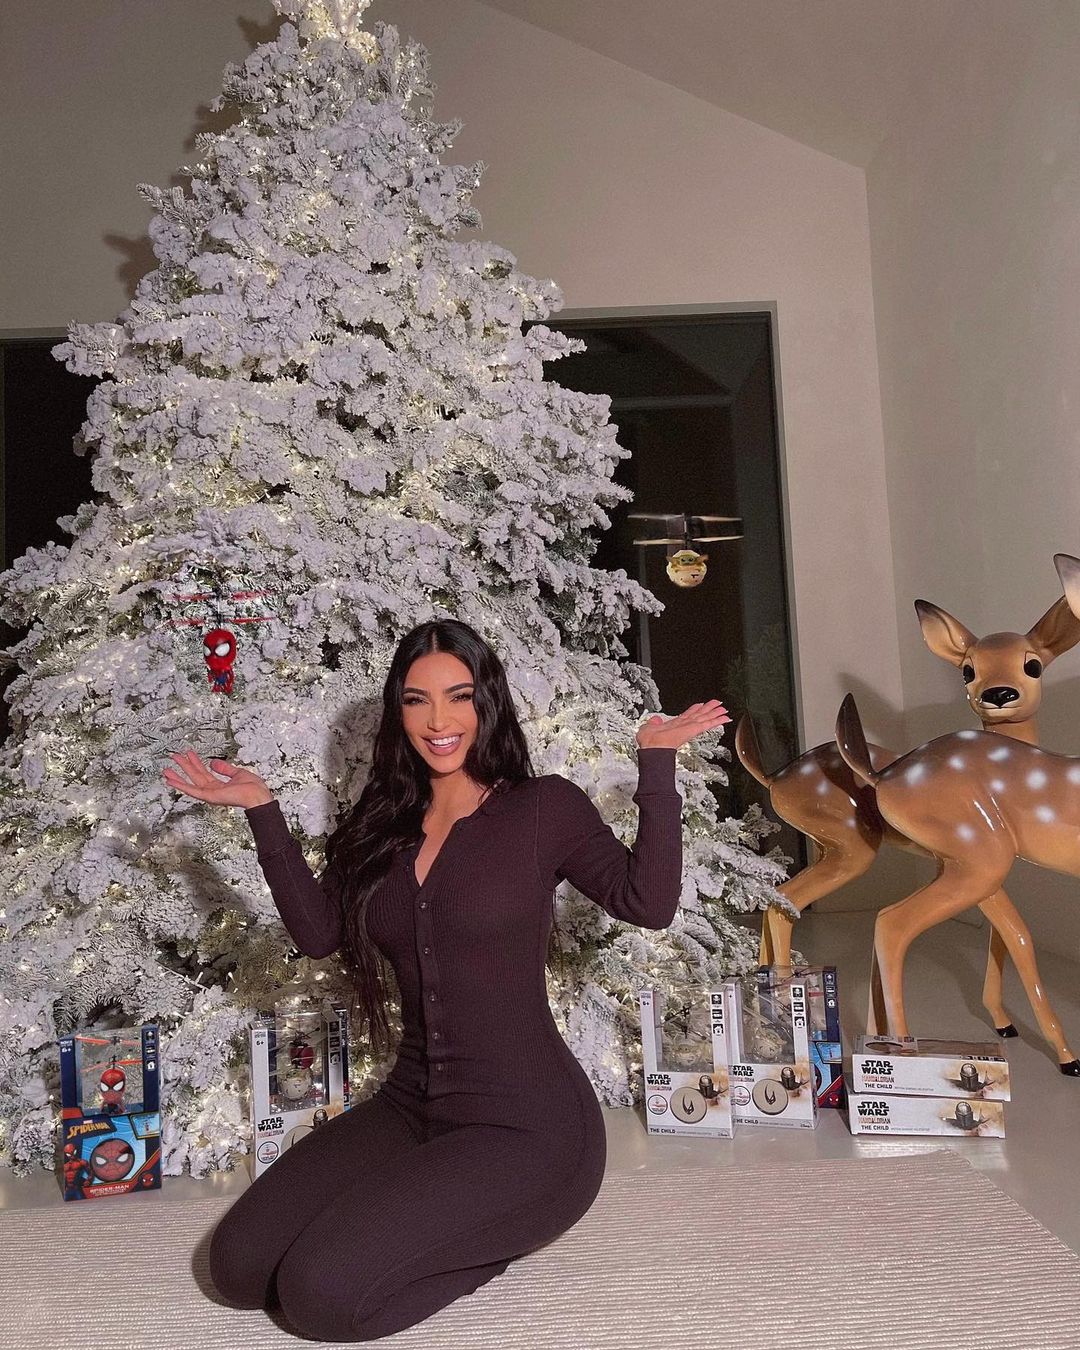 Fans have trolled Kim for her 'minimal' holiday decor